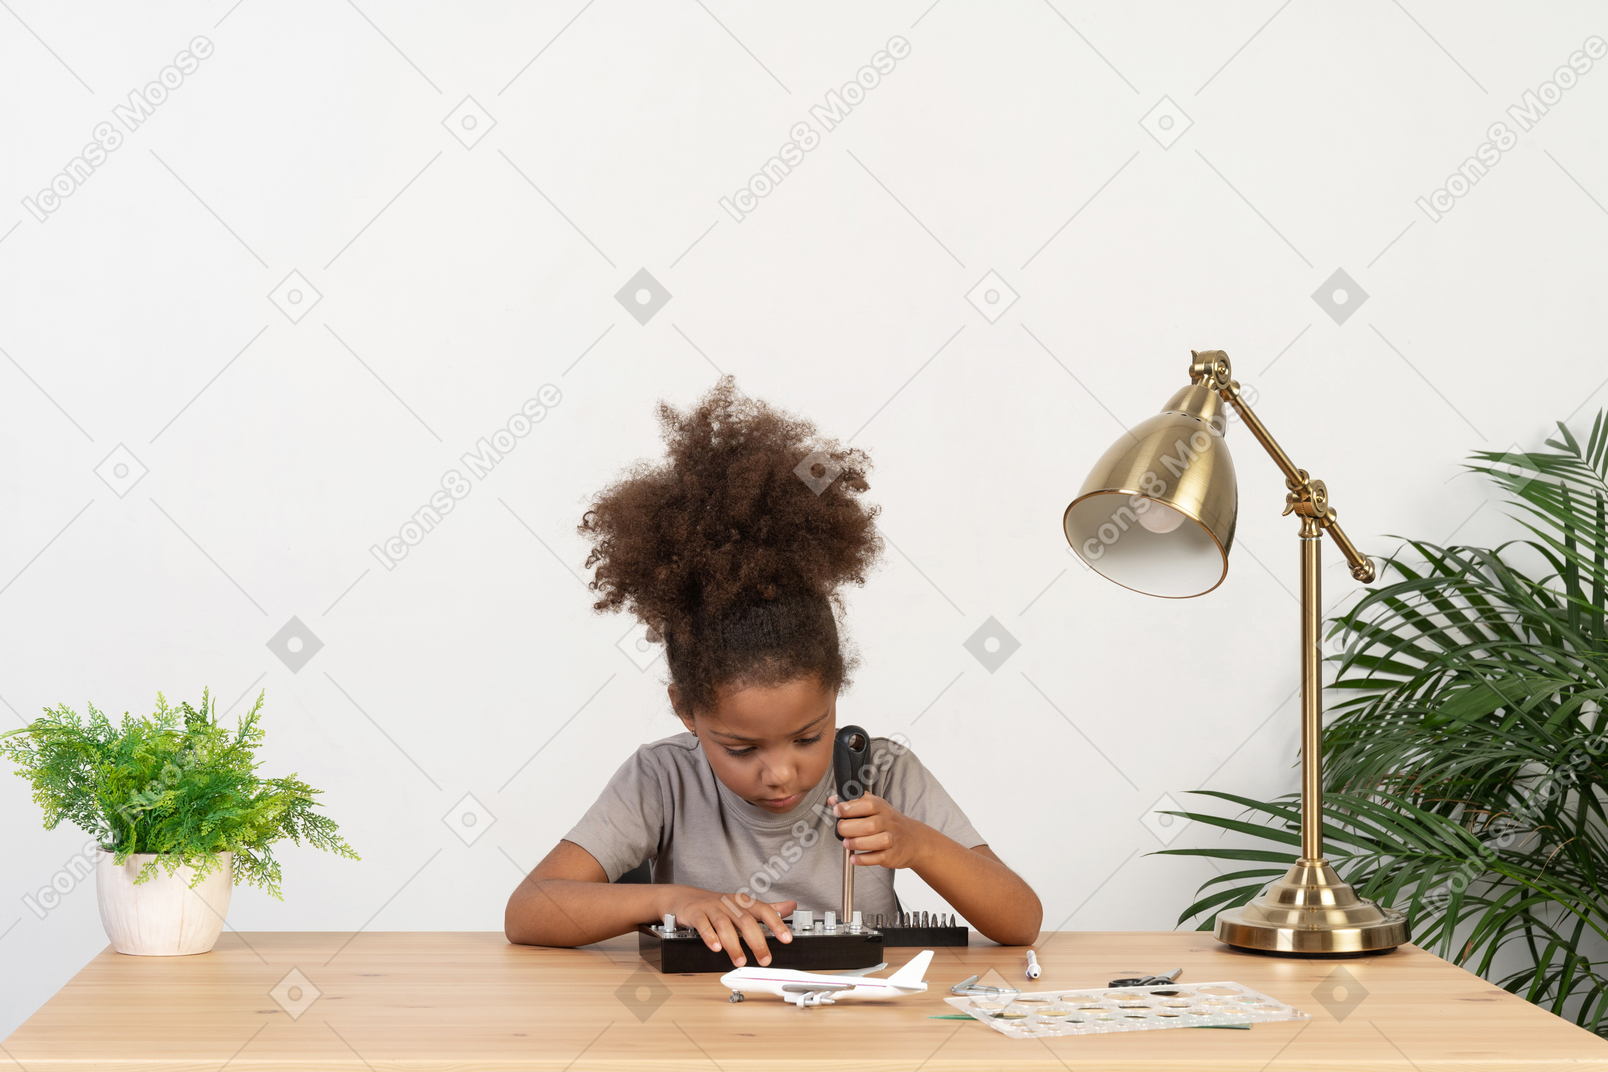 Cute girl trying to repair an device